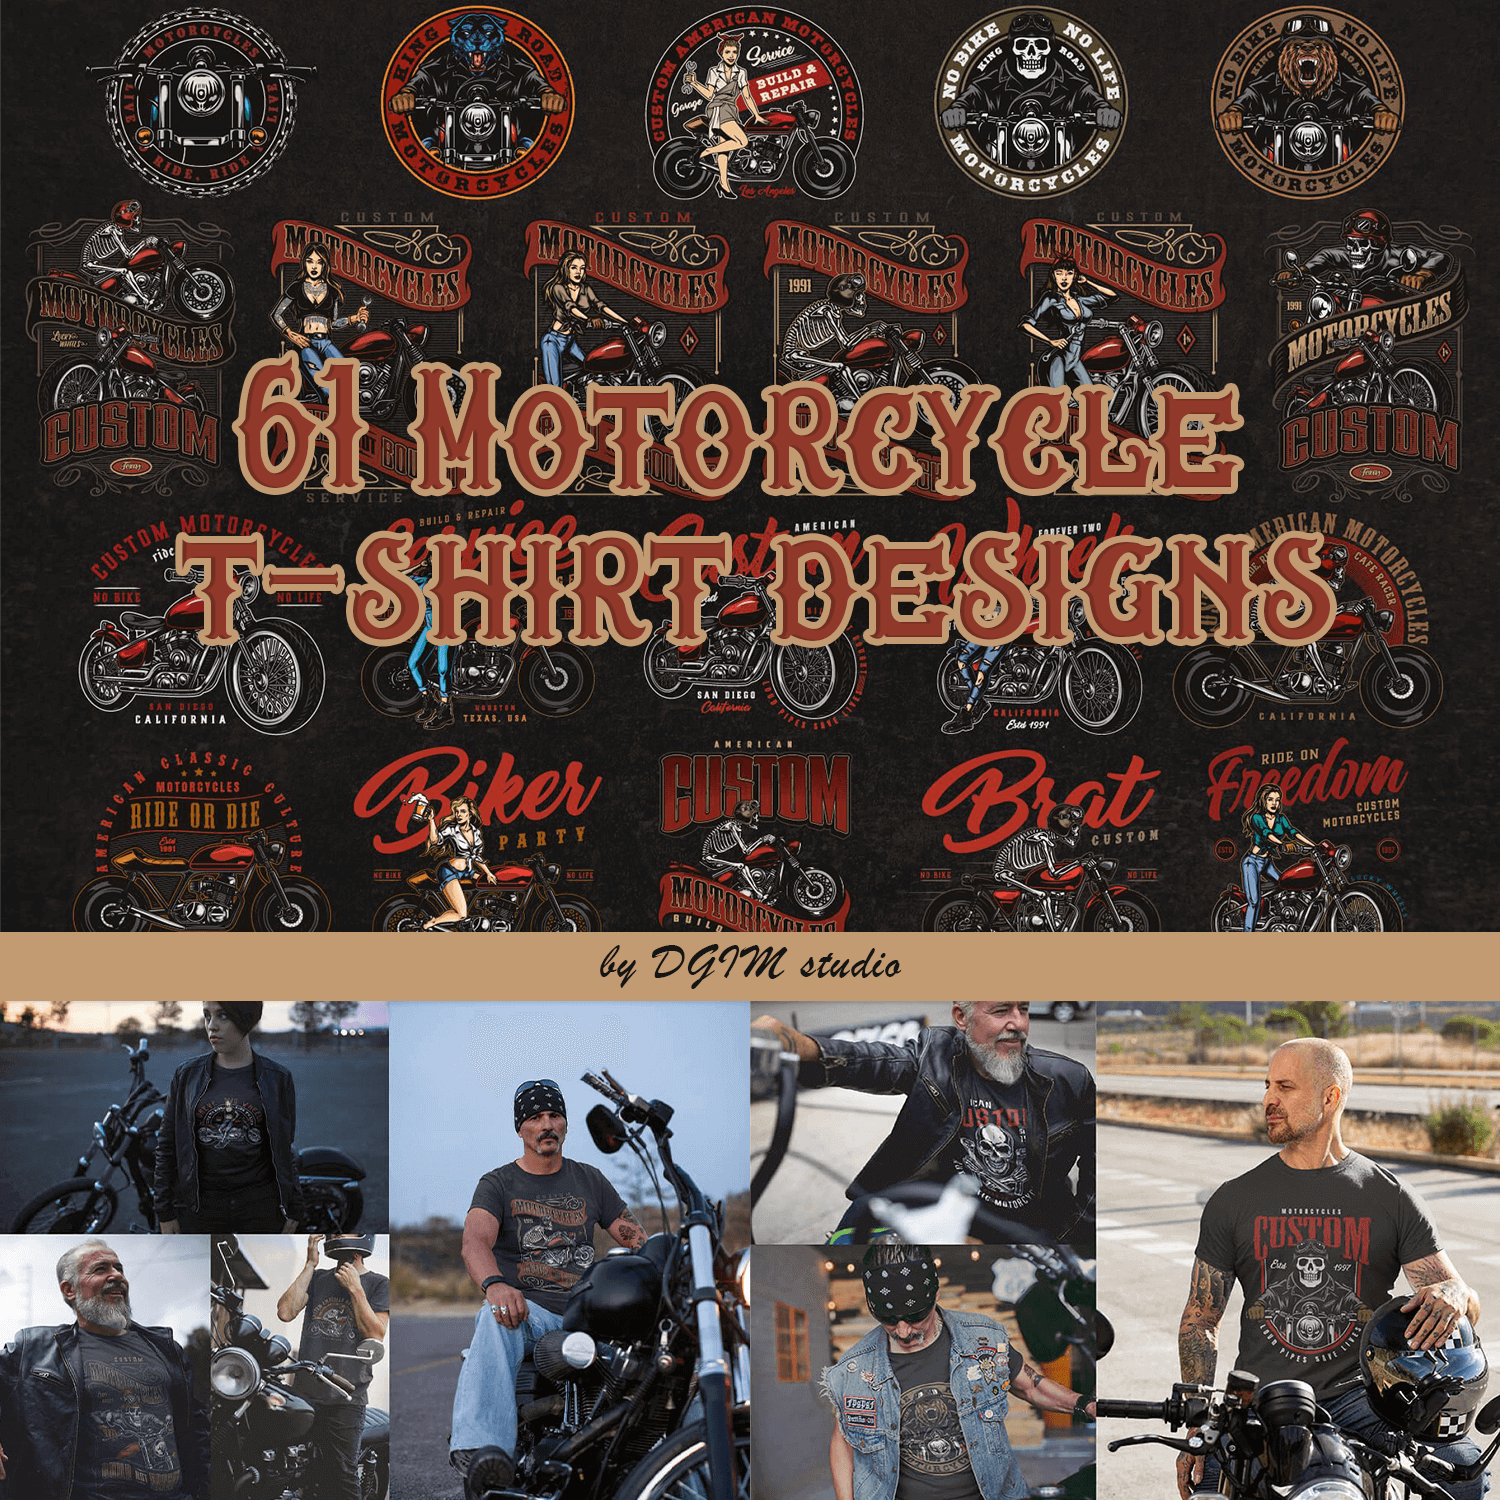 Examples of uses 61 motorcycle T-shirt designs.